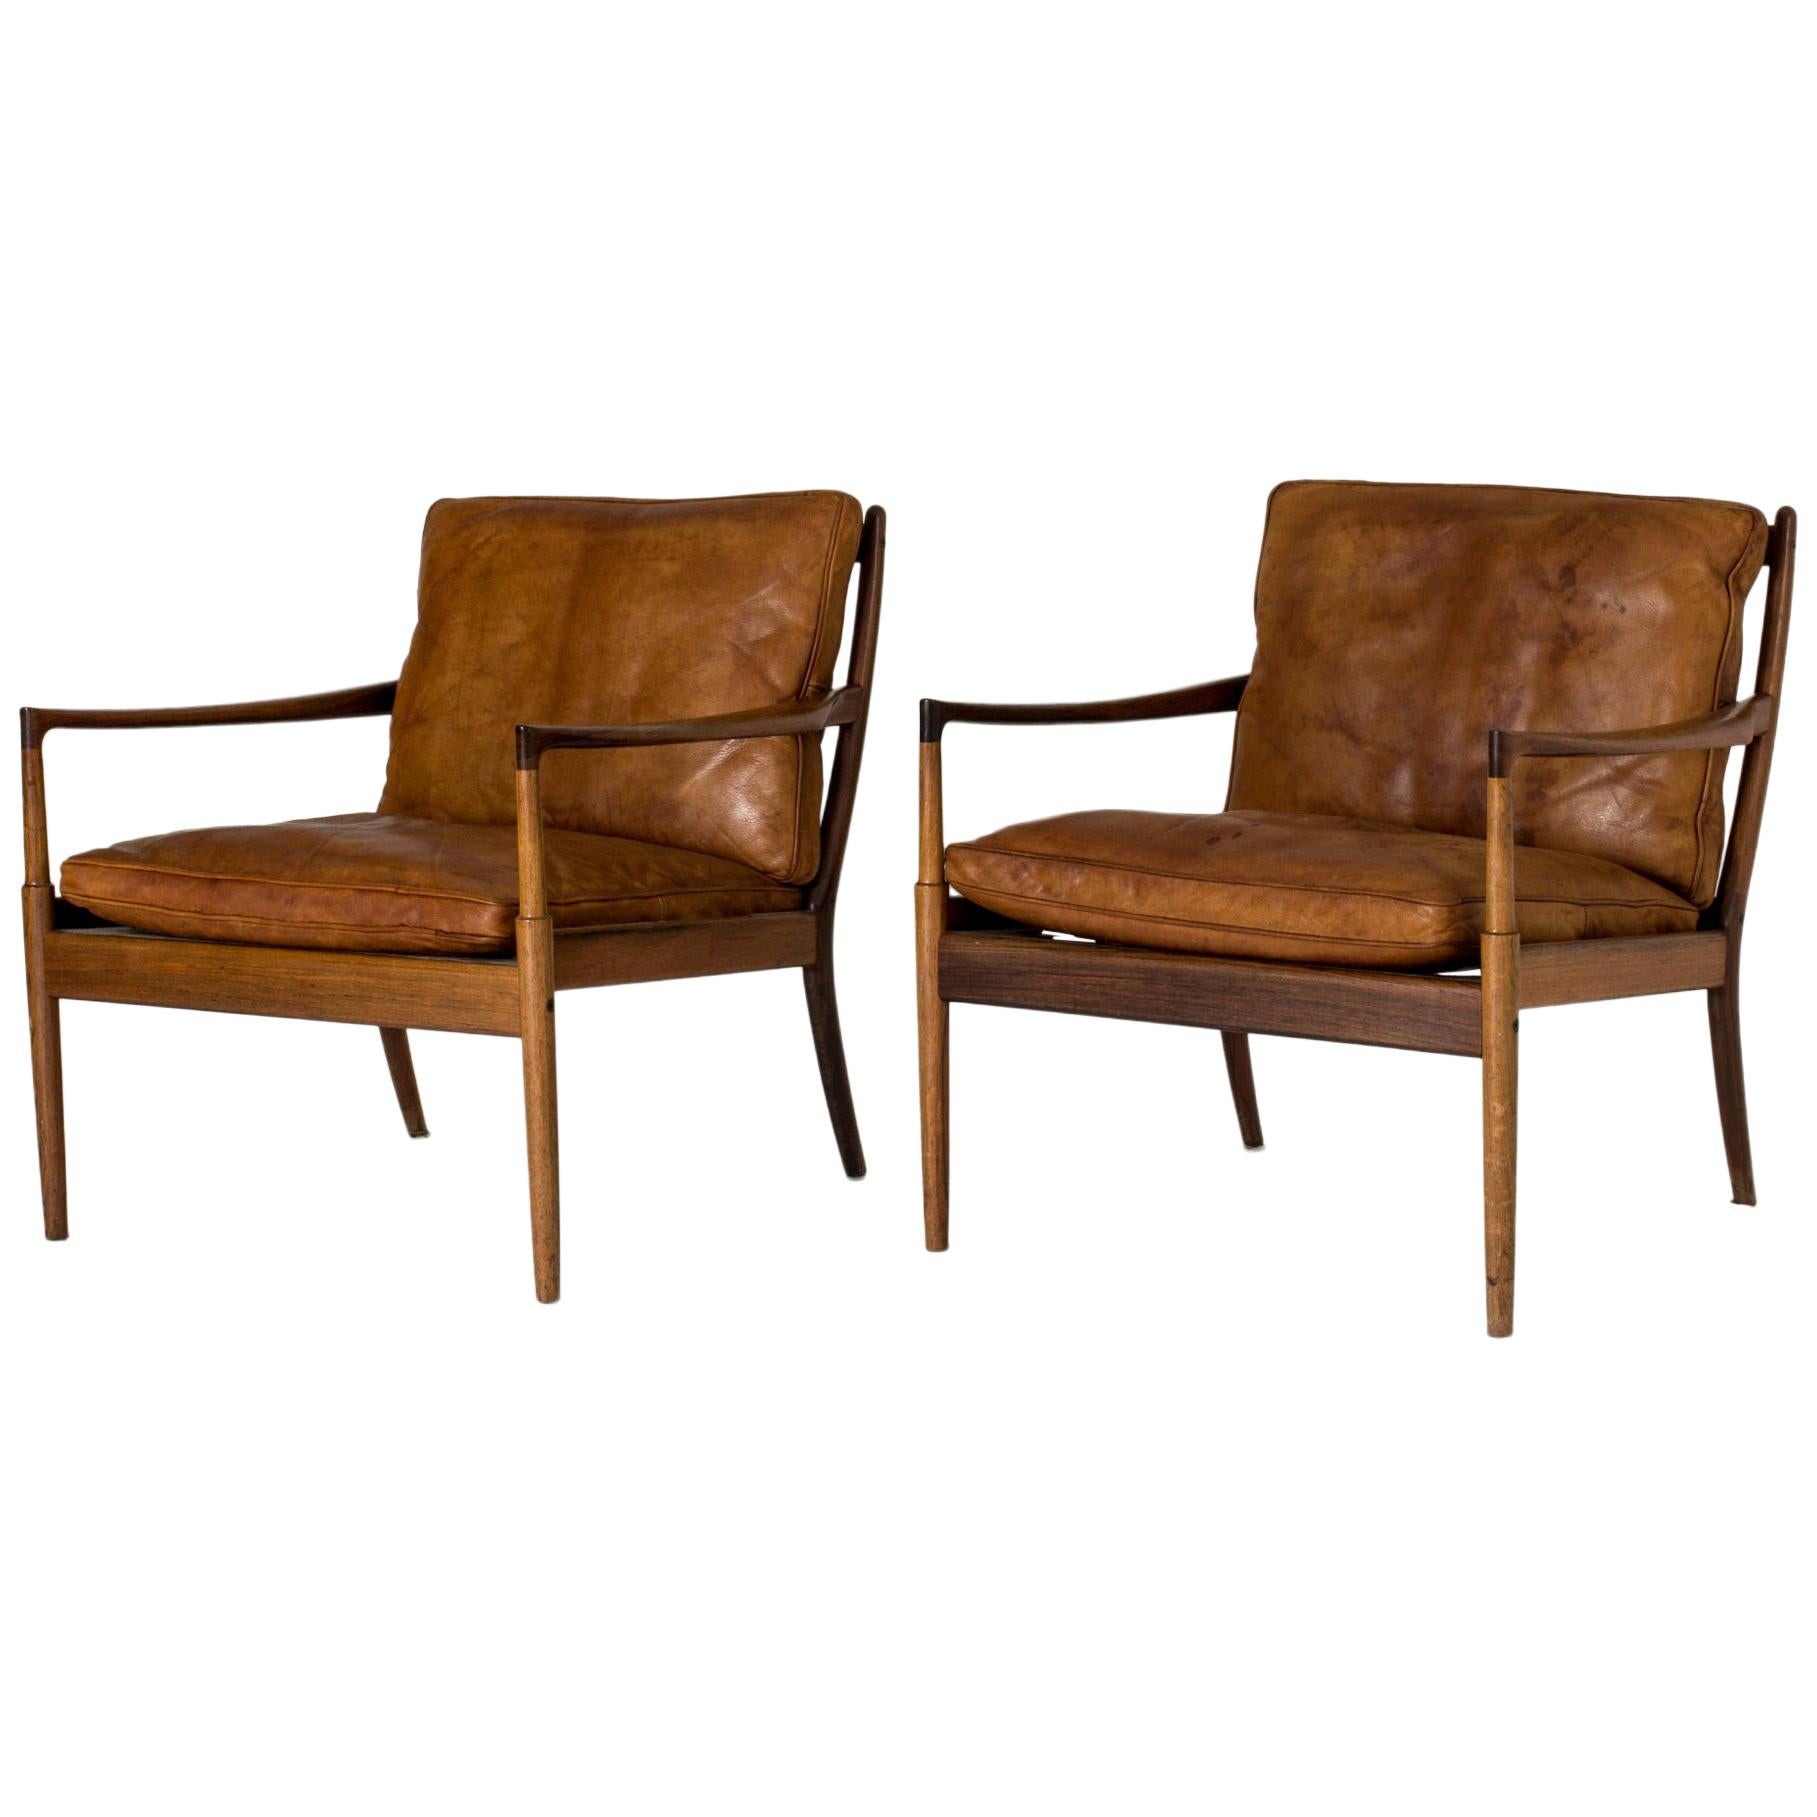 Pair of Rosewood and Leather “Samsö” Lounge Chairs by Ib Kofod Larsen